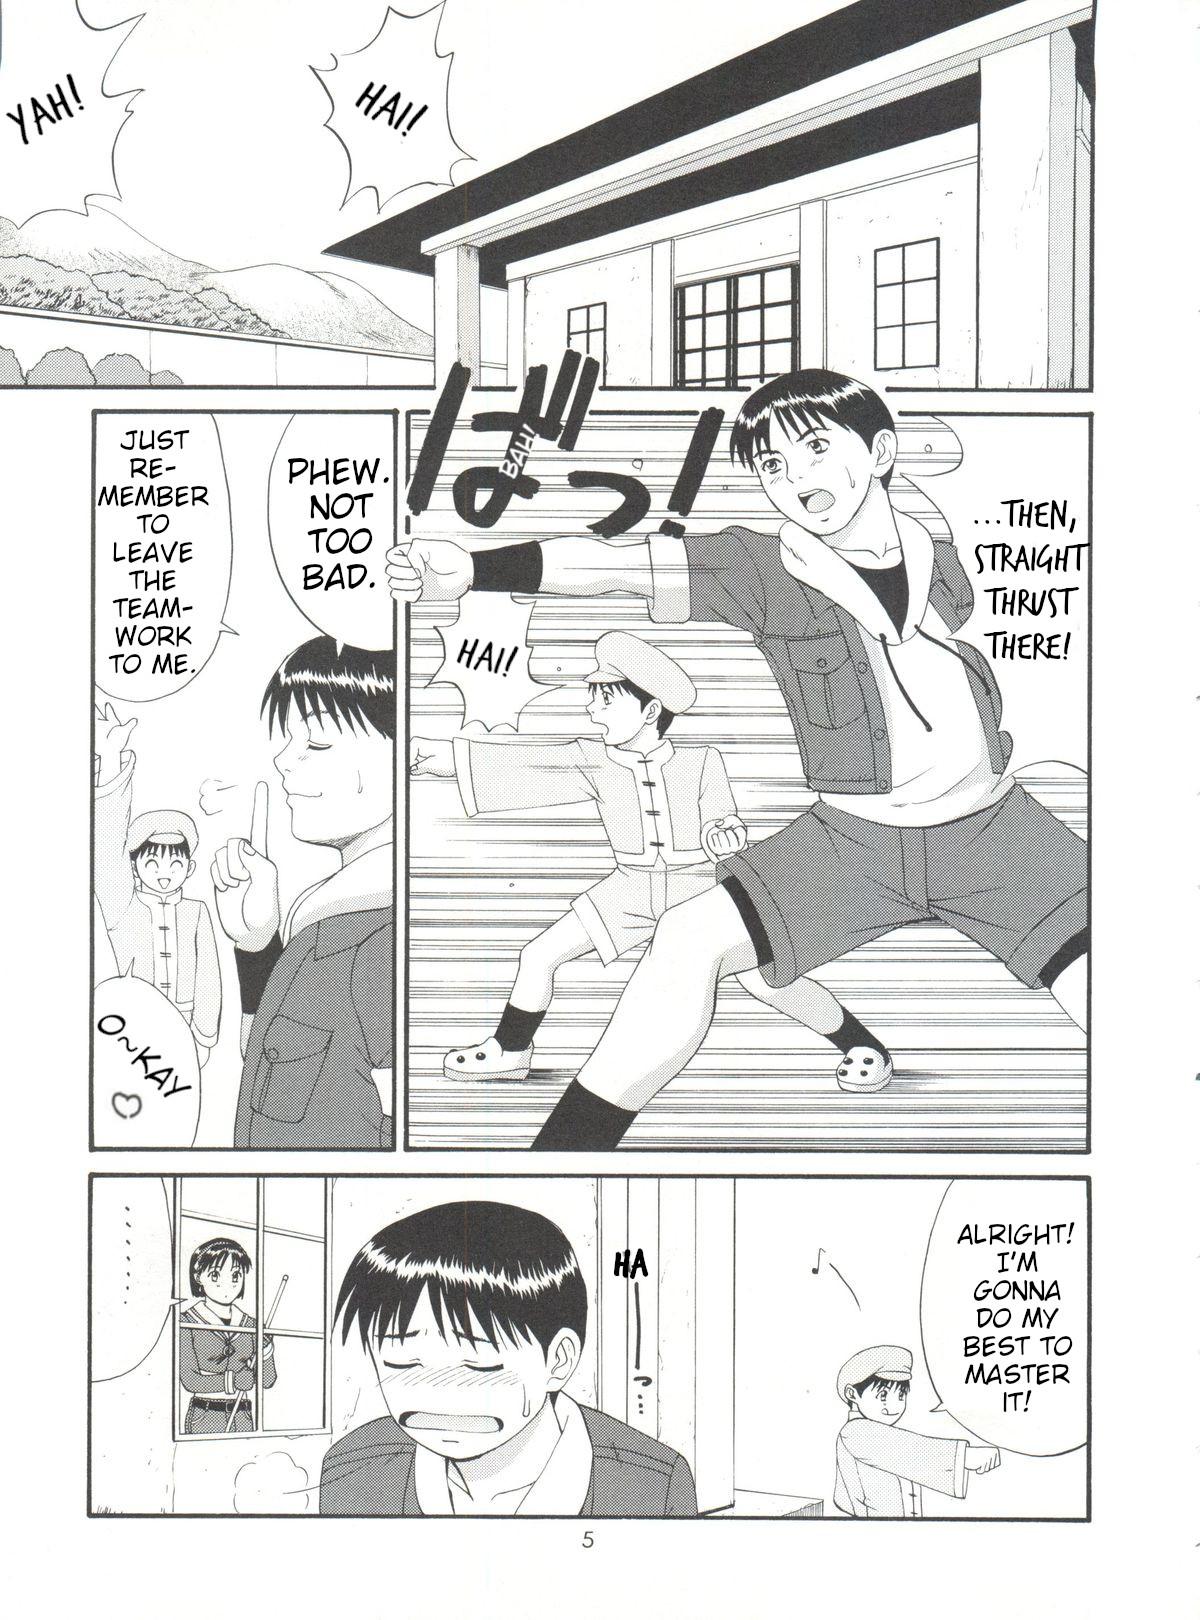 Secret [Saigado (Ishoku Dougen)] The Athena & Friends '99 (King of Fighters) English - King of fighters Casting - Page 4